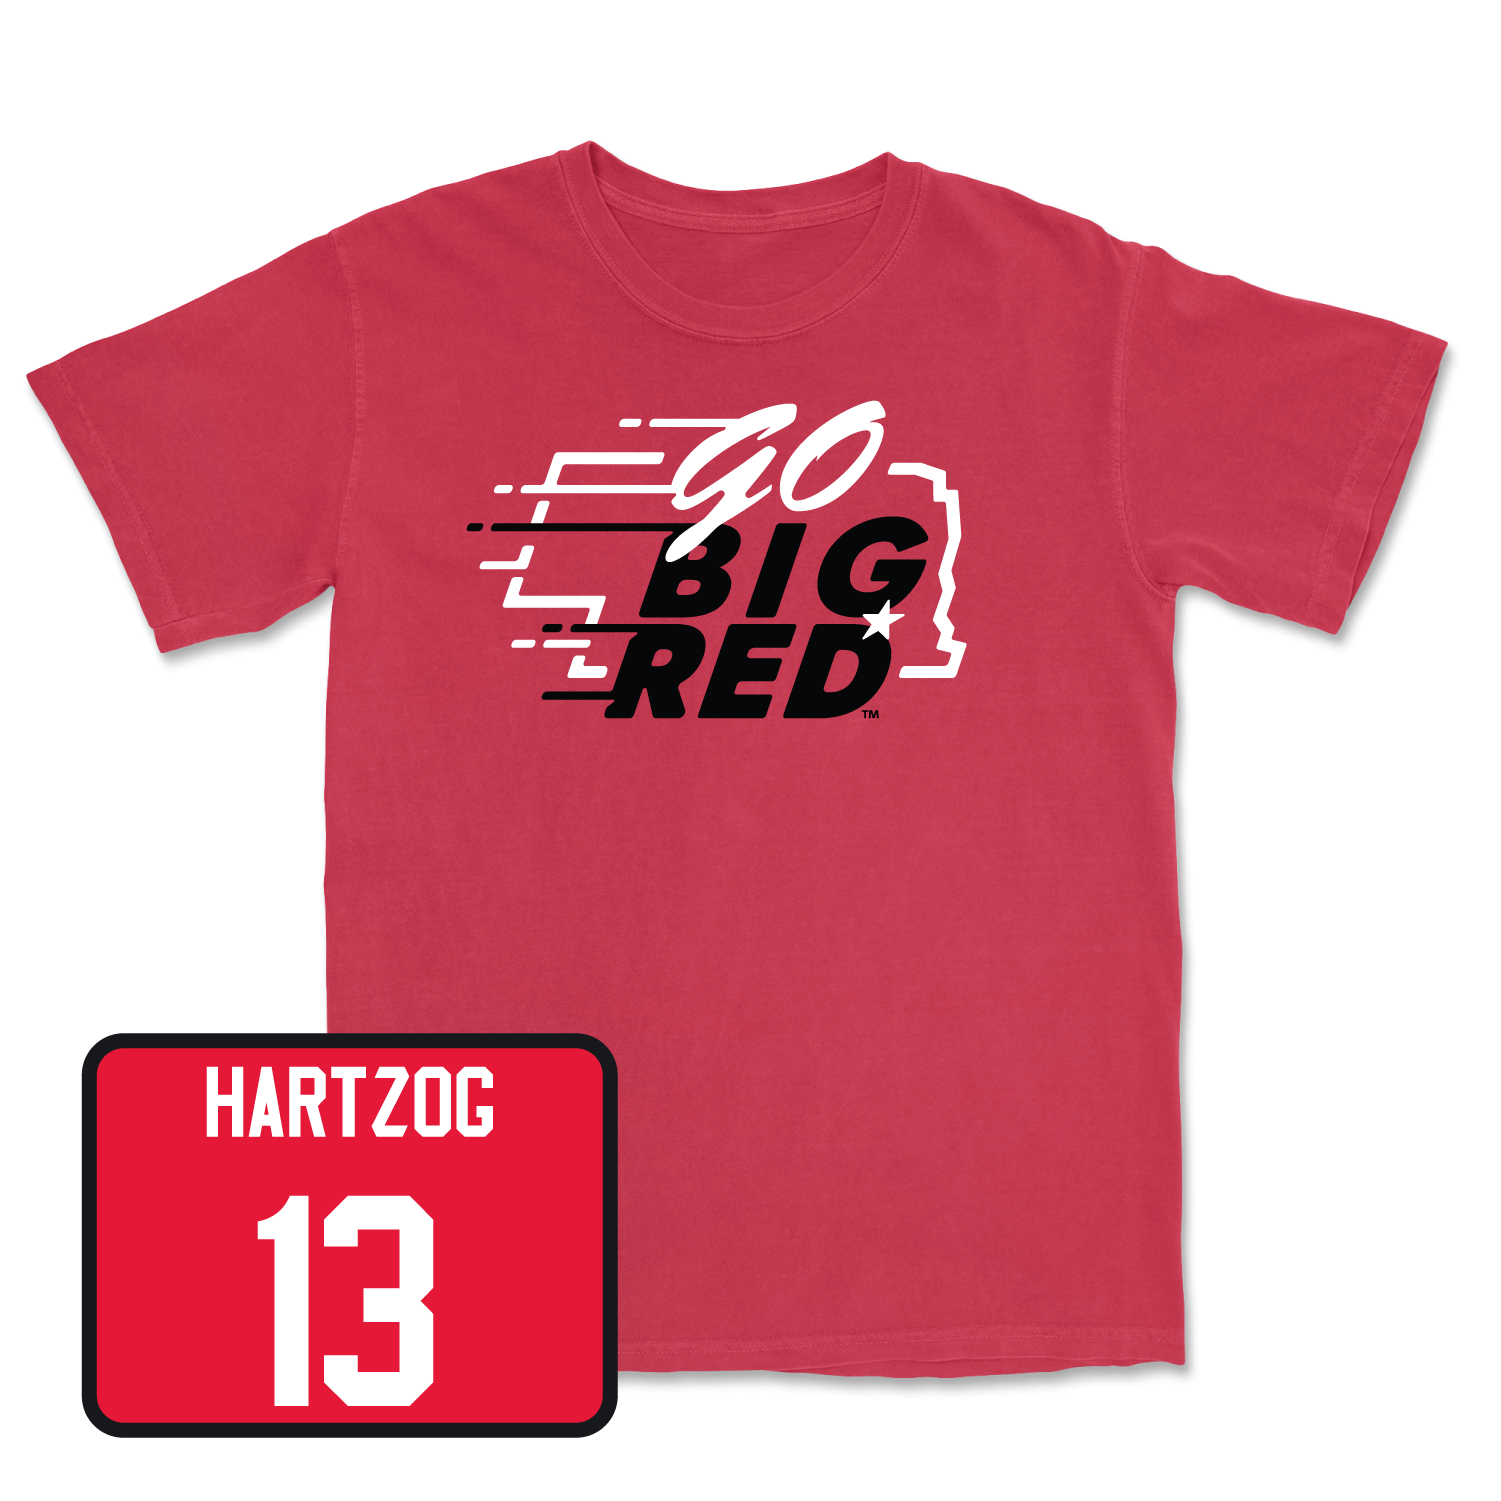 Red Football GBR Tee 2 Large / Malcolm Hartzog | #13